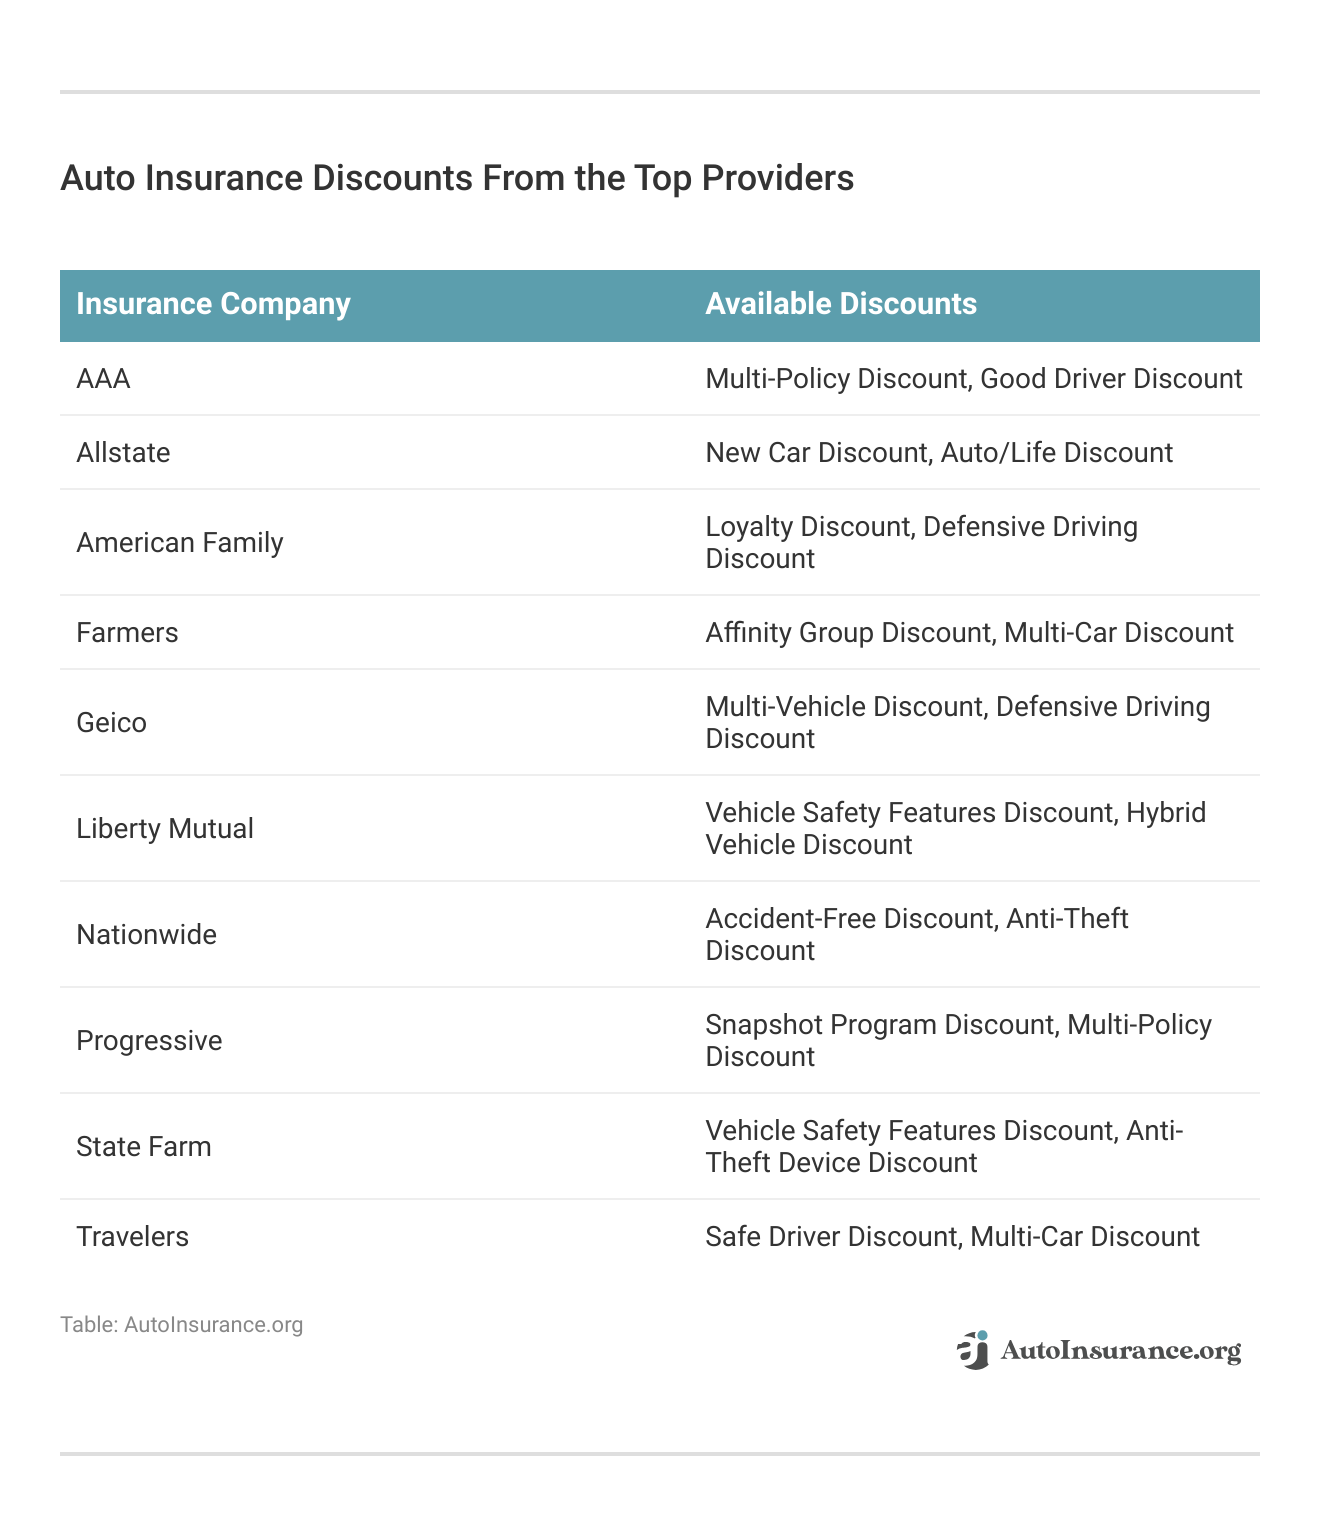 <h3>Auto Insurance Discounts From the Top Providers</h3>